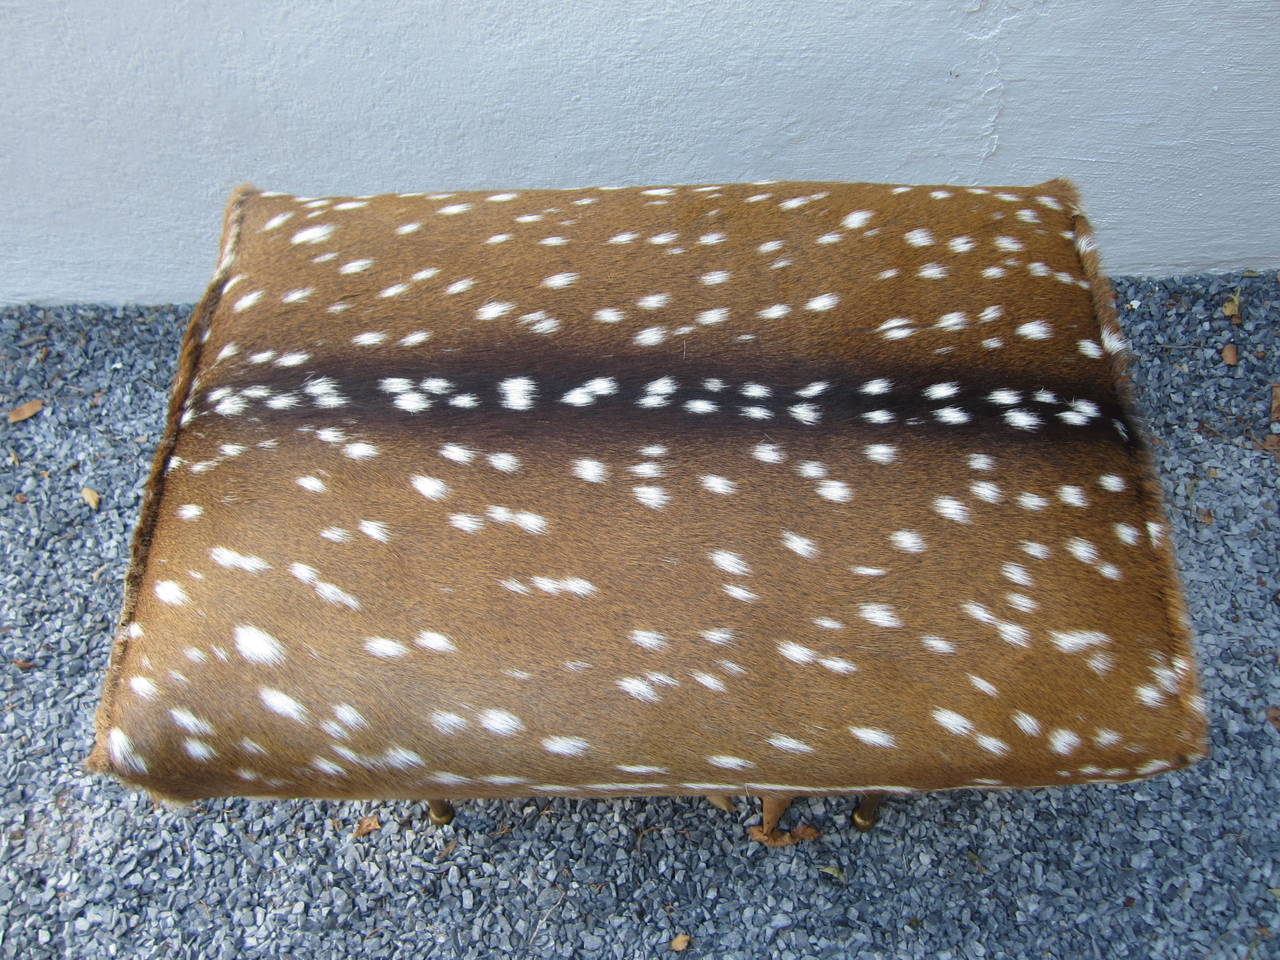 Modernist style bench with metal Italianesque modern legs, upholstered in dappled deer hide.